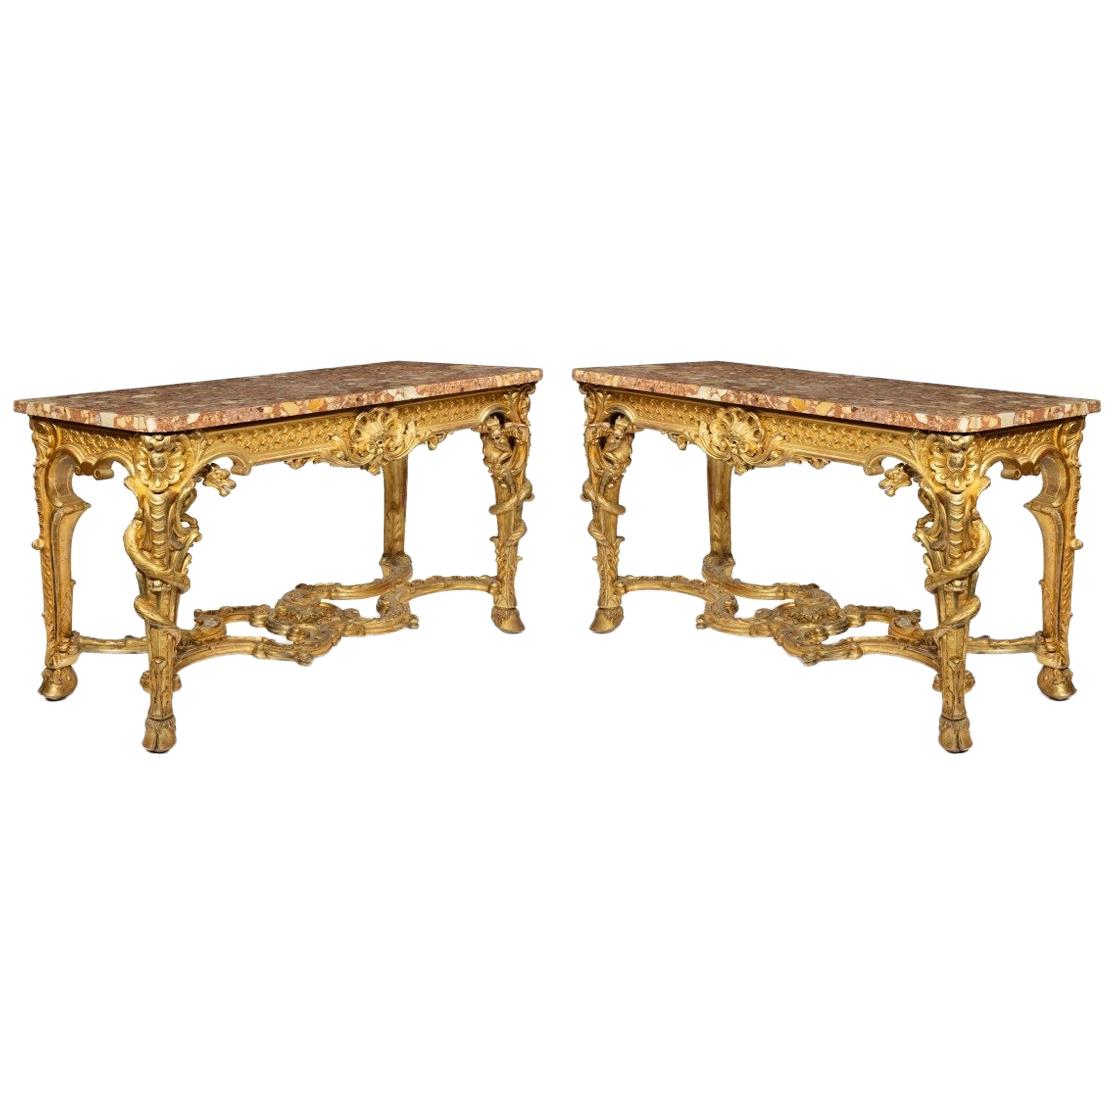 Superb Pair of Giltwood Console Tables with Original Marble Tops